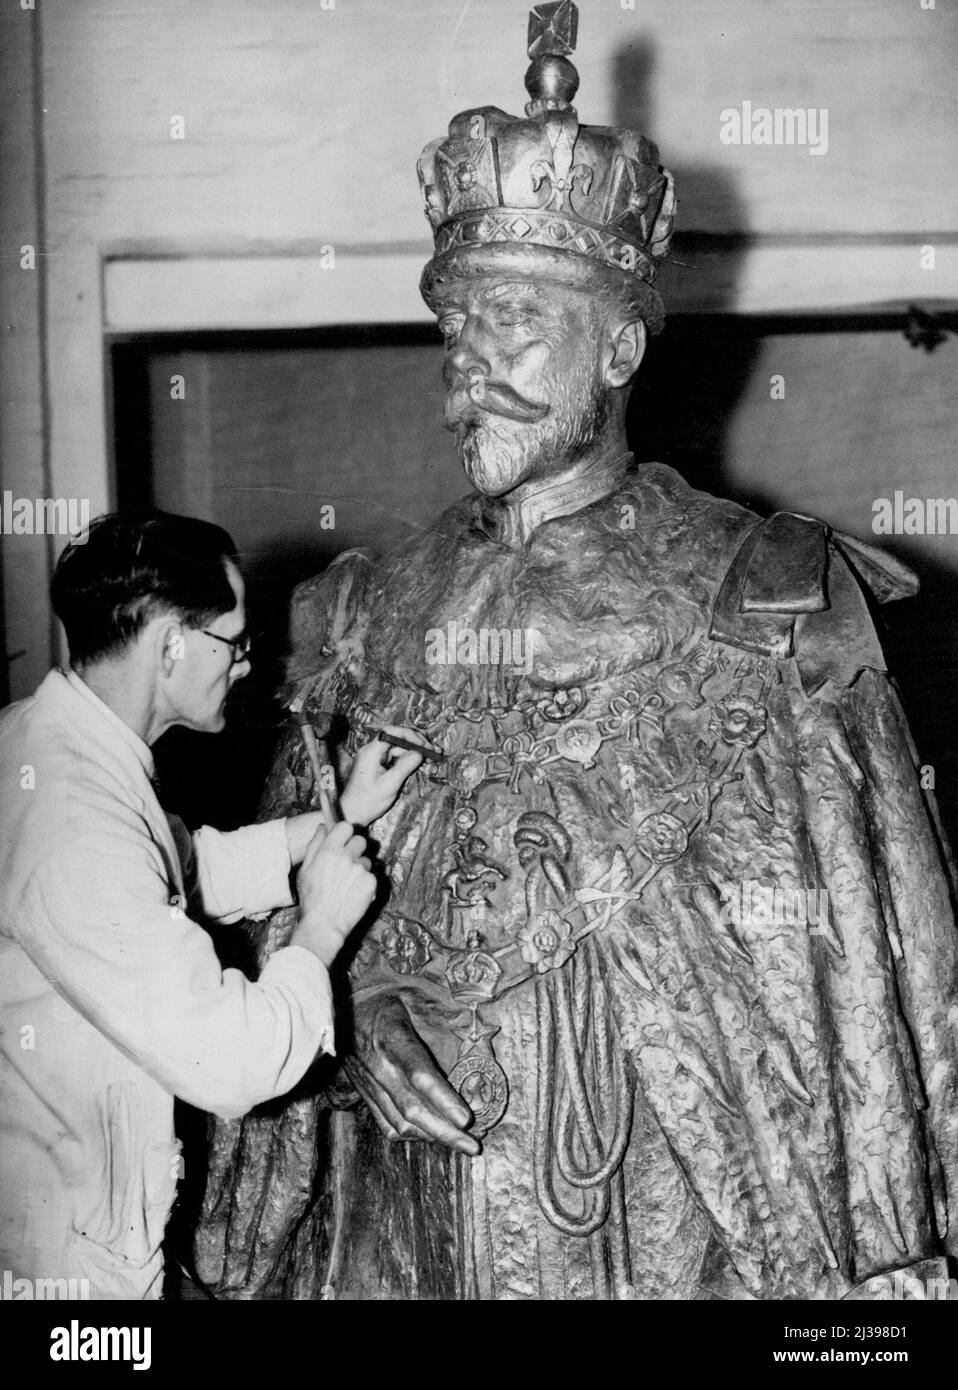 Bengal's Memorial to our Late King. A close-up of the life-like statue, being prepared for its trip to India, at a Thames Ditton foundry today. Mr. William MacMillan, R.A., has just completed a huge 10ft 6ins high state of King George V, which on Friday will be dispatched to India. It will be placed opposite the Outram Ghat, In Calcutta- which has been called the city of statues- as Bengal's memorial to our late King. The finished memorial will include a large pedestal rising 25 feet above the roadway, and three fountains. November 16, 1938. (Photo by Fox). Stock Photo